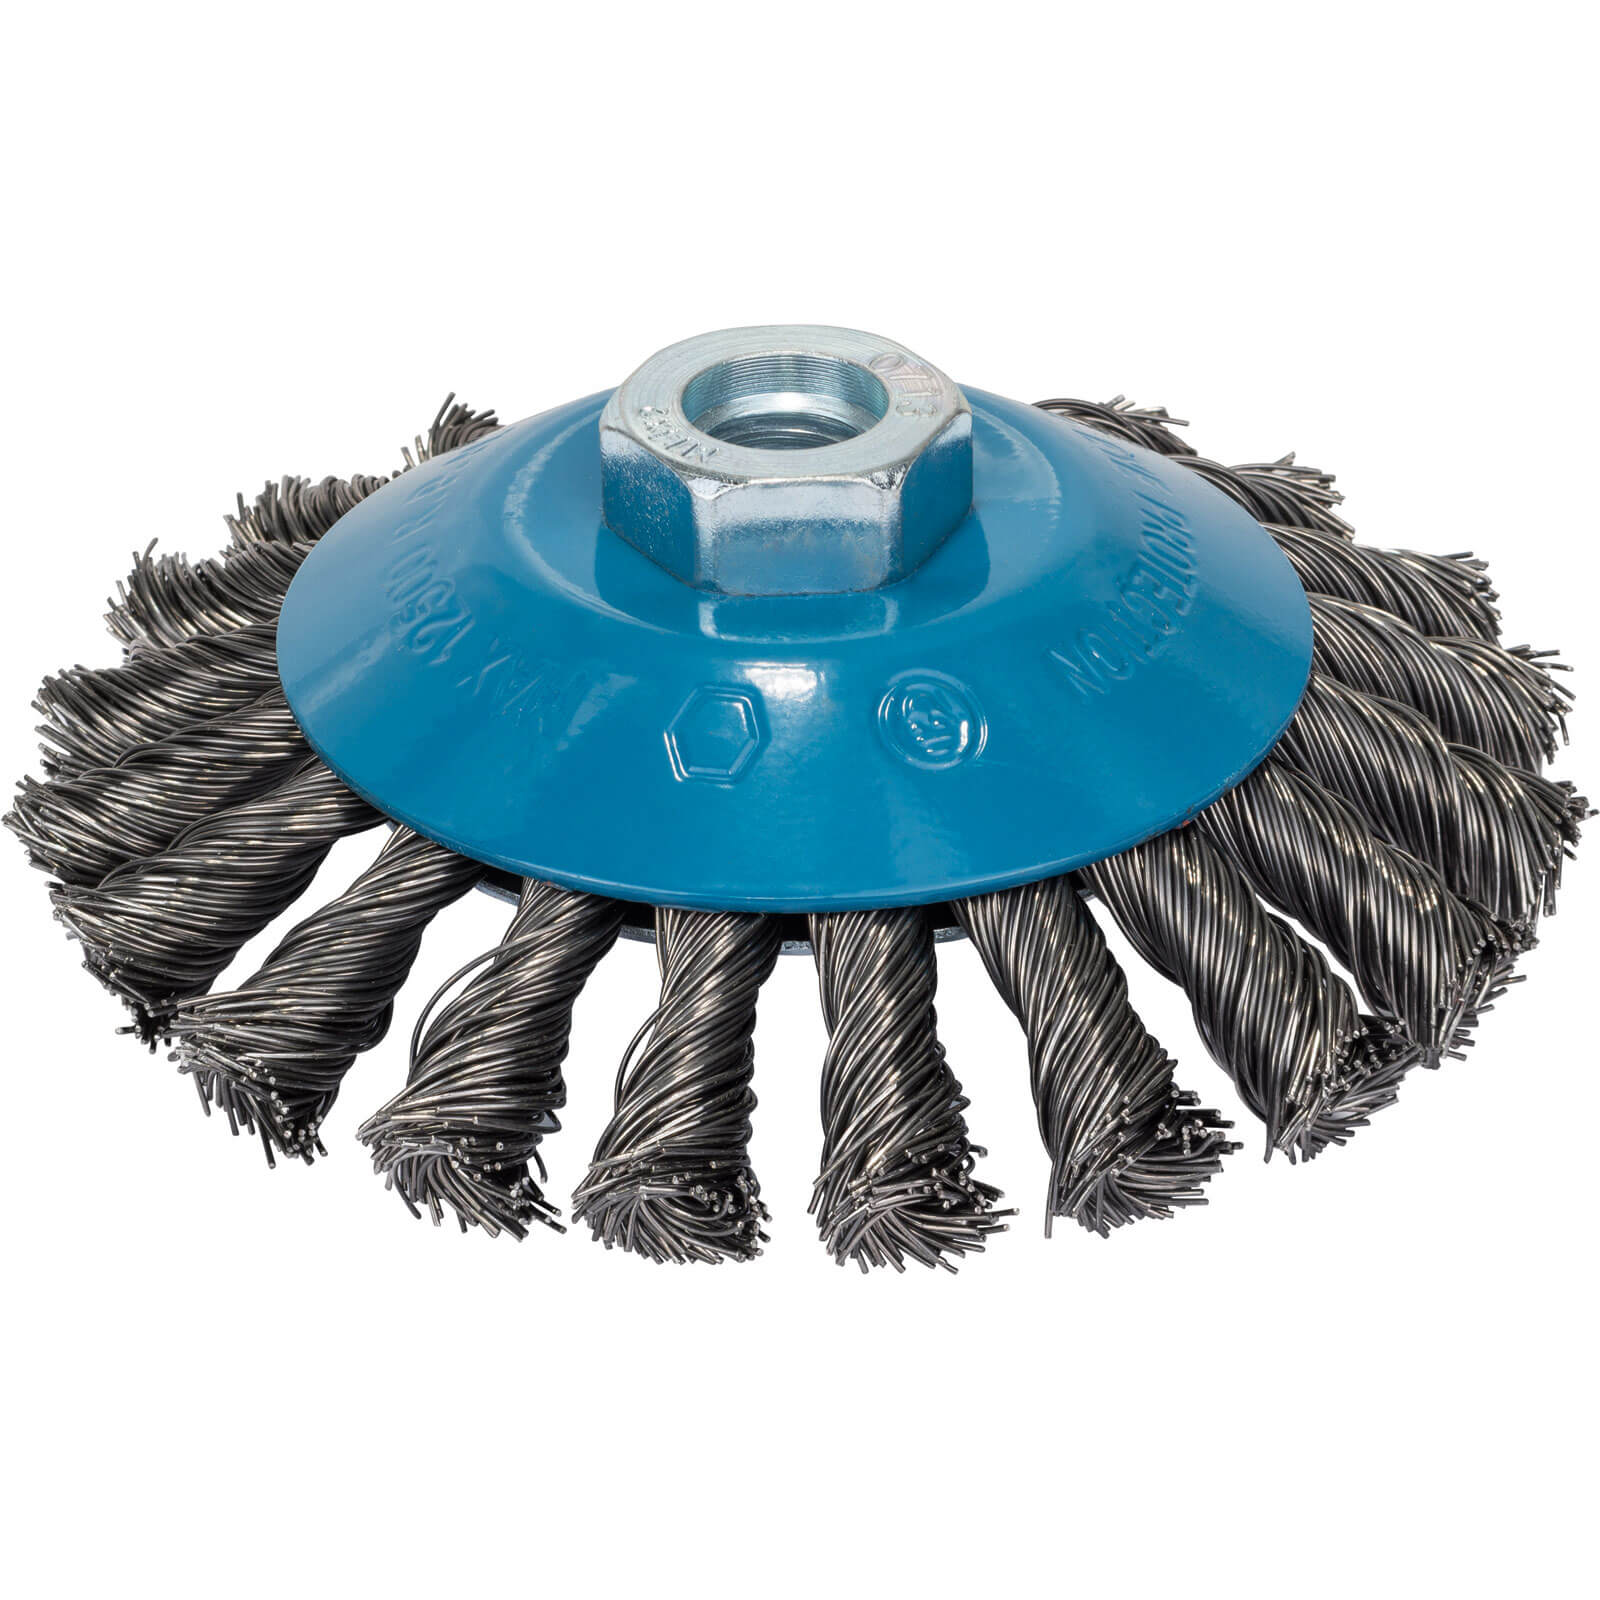 Image of Bosch 0.5mm Knotted Conical Steel Wire Wheel Brush 115mm M14 Thread